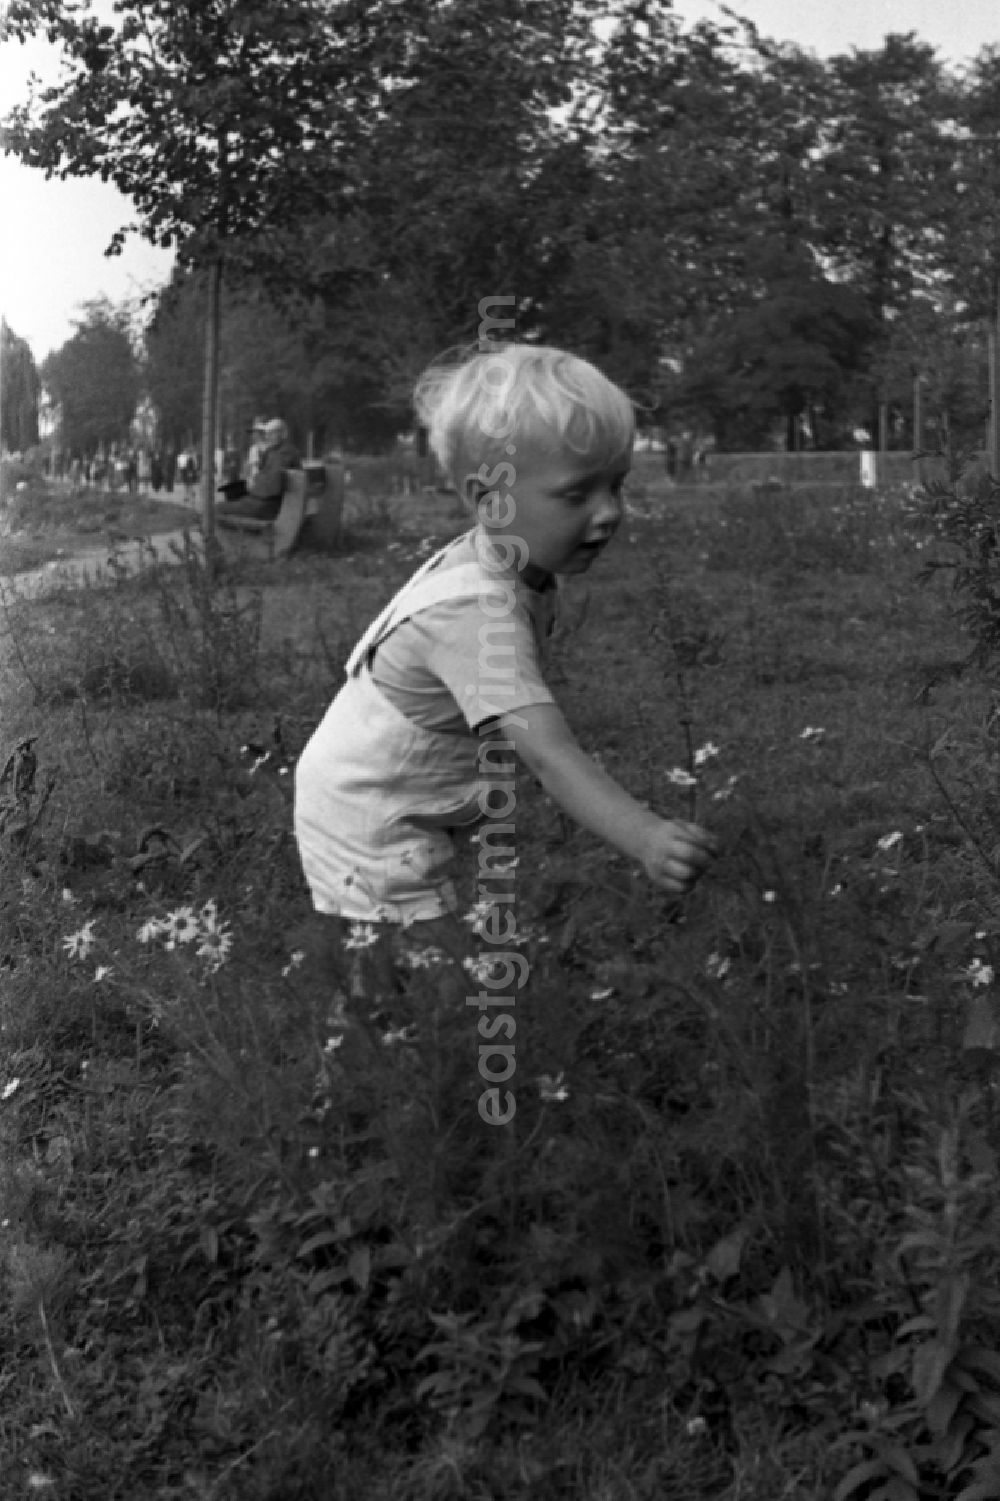 GDR image archive: Bad Dürrenberg - A small boy picks flowers on a meadow in bath Drought mountain in the federal state Saxony-Anhalt in Germany